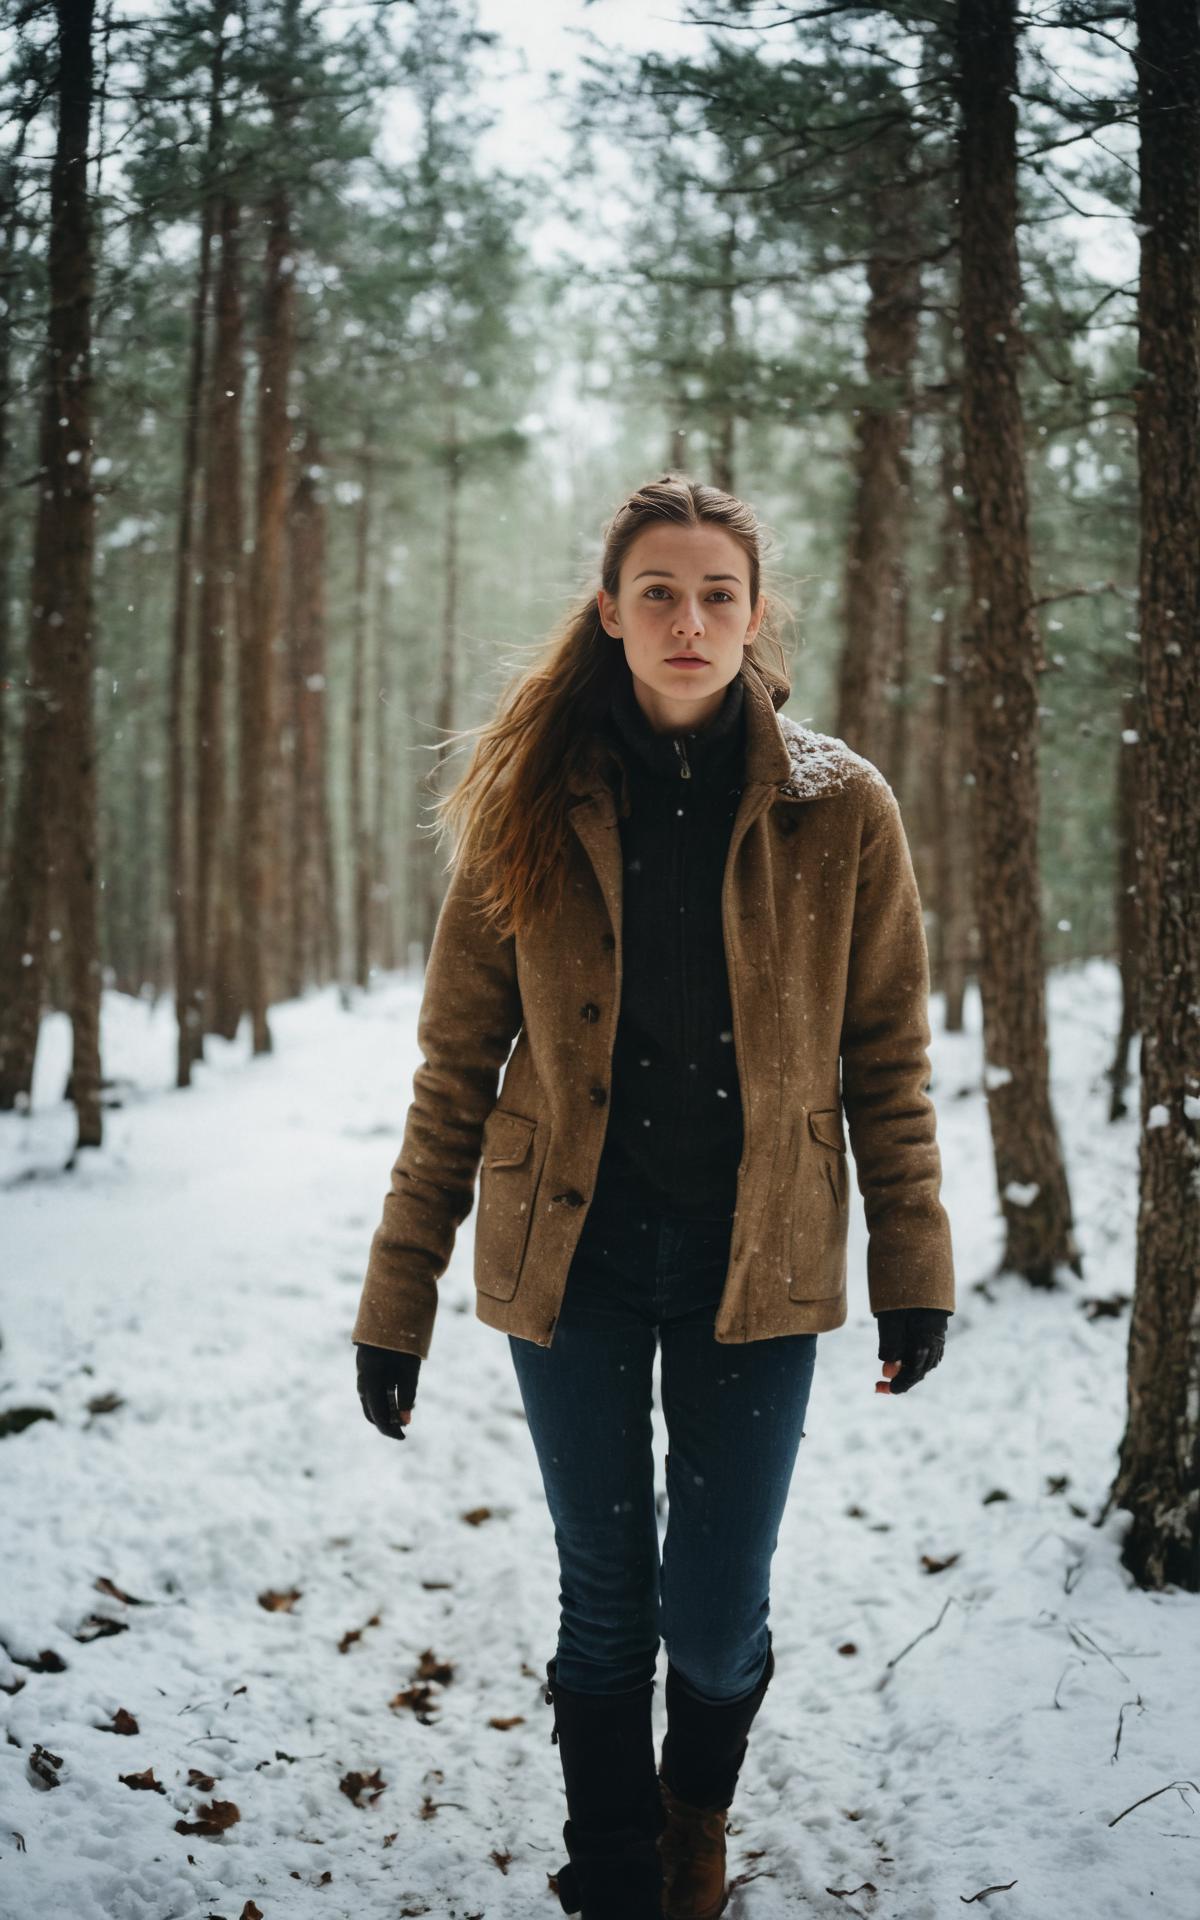 A Woman Walking Along a Snowy Path in a Forest